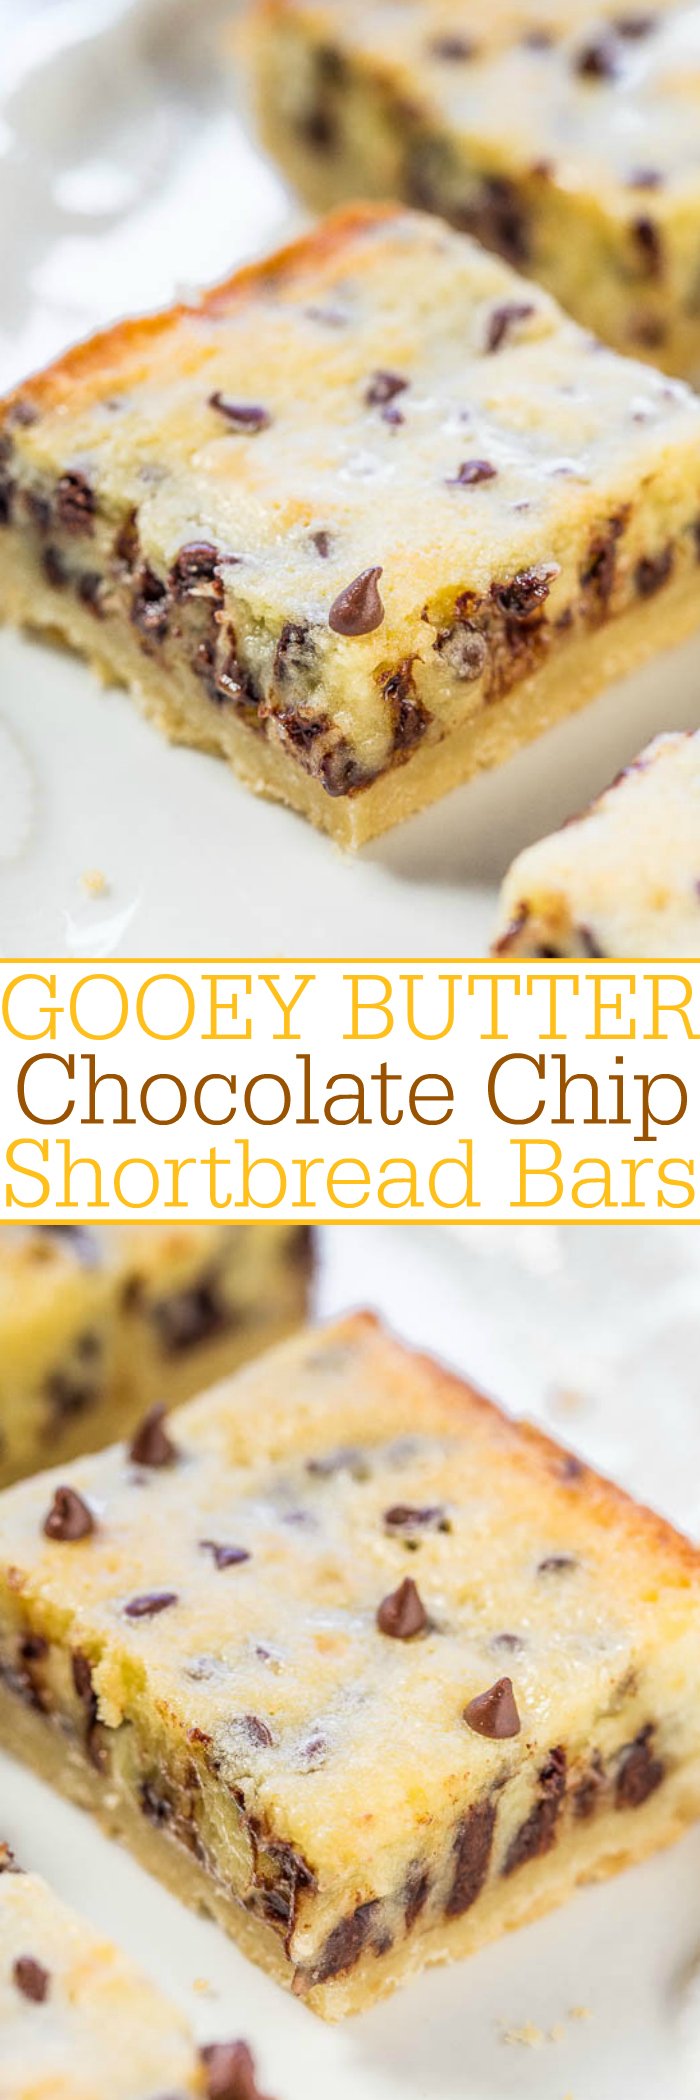 Gooey Butter Chocolate Chip Shortbread Bars - A buttery shortbread crust topped with a creamy, buttery topping that's almost like custard!! The bars live up to their gooey, buttery name!!